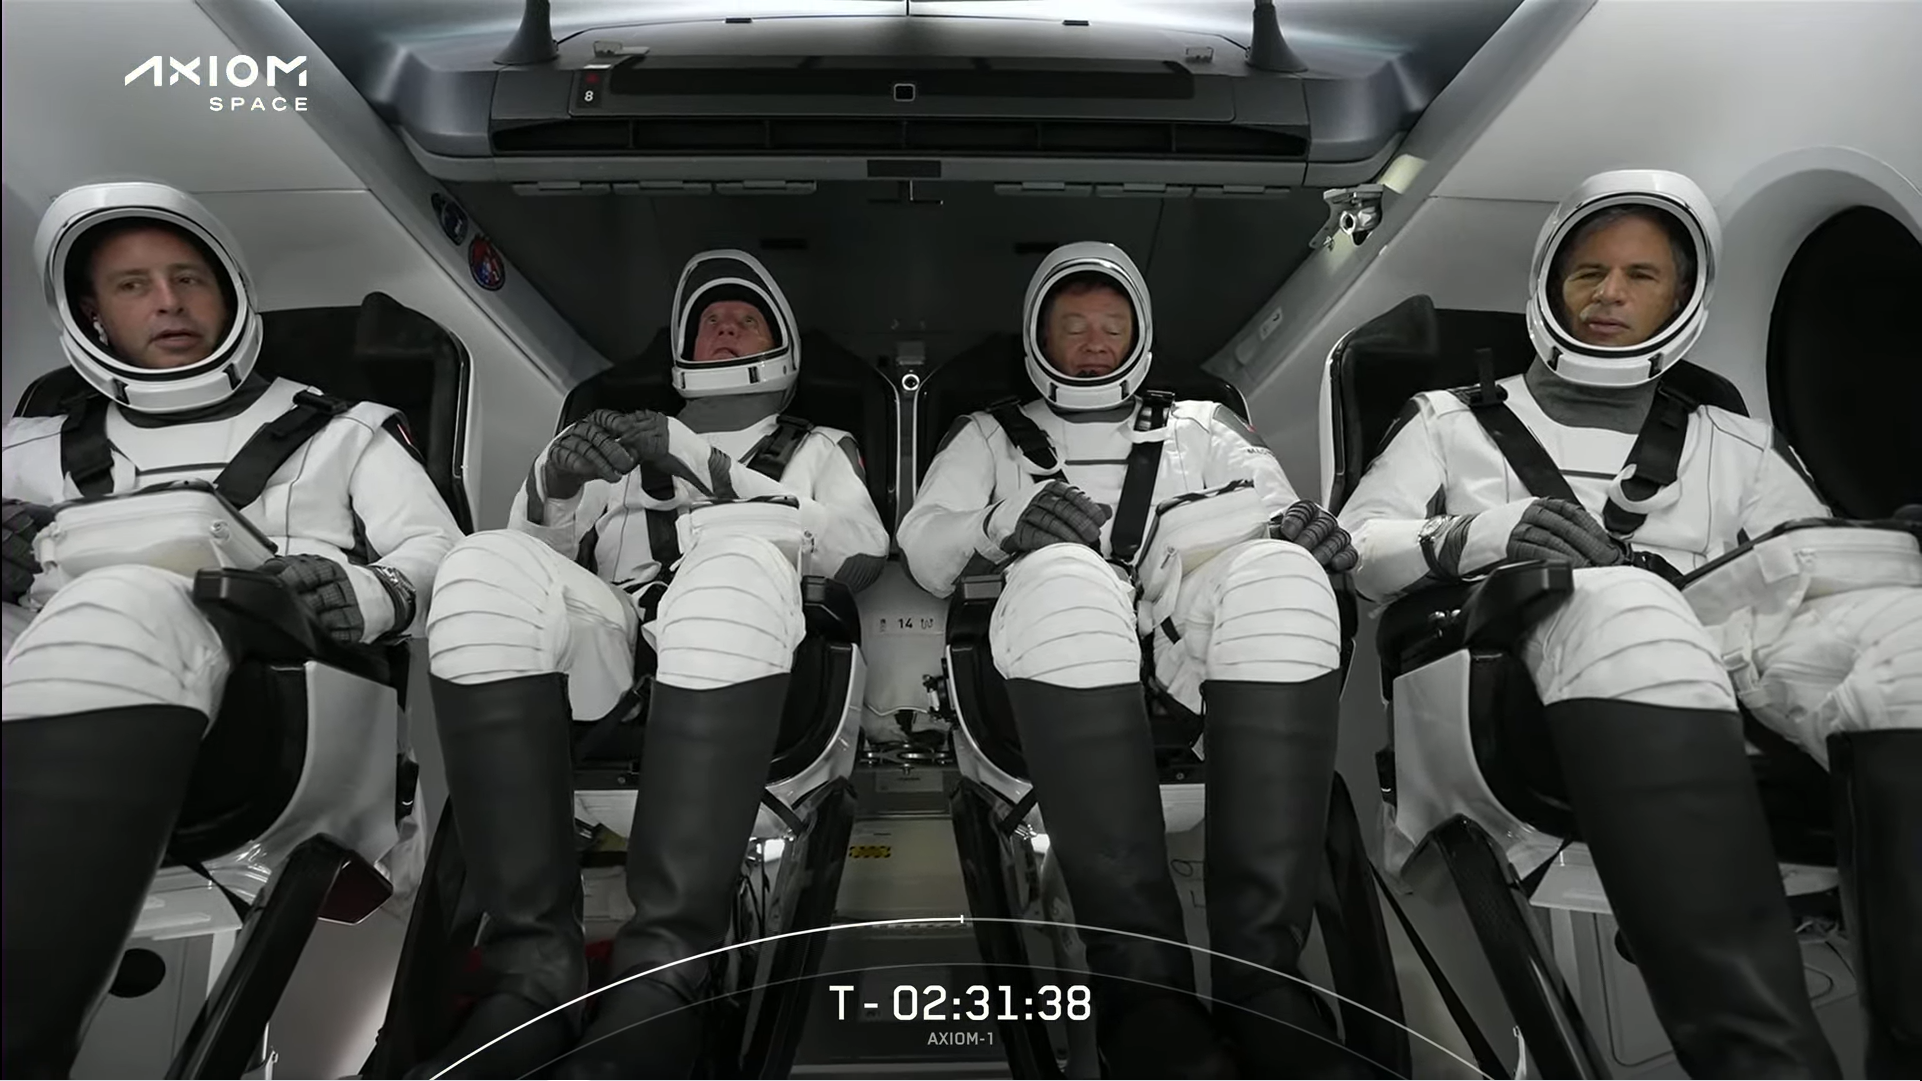 The four astronauts of Ax-1 strapped into the Endeavour before comms check.